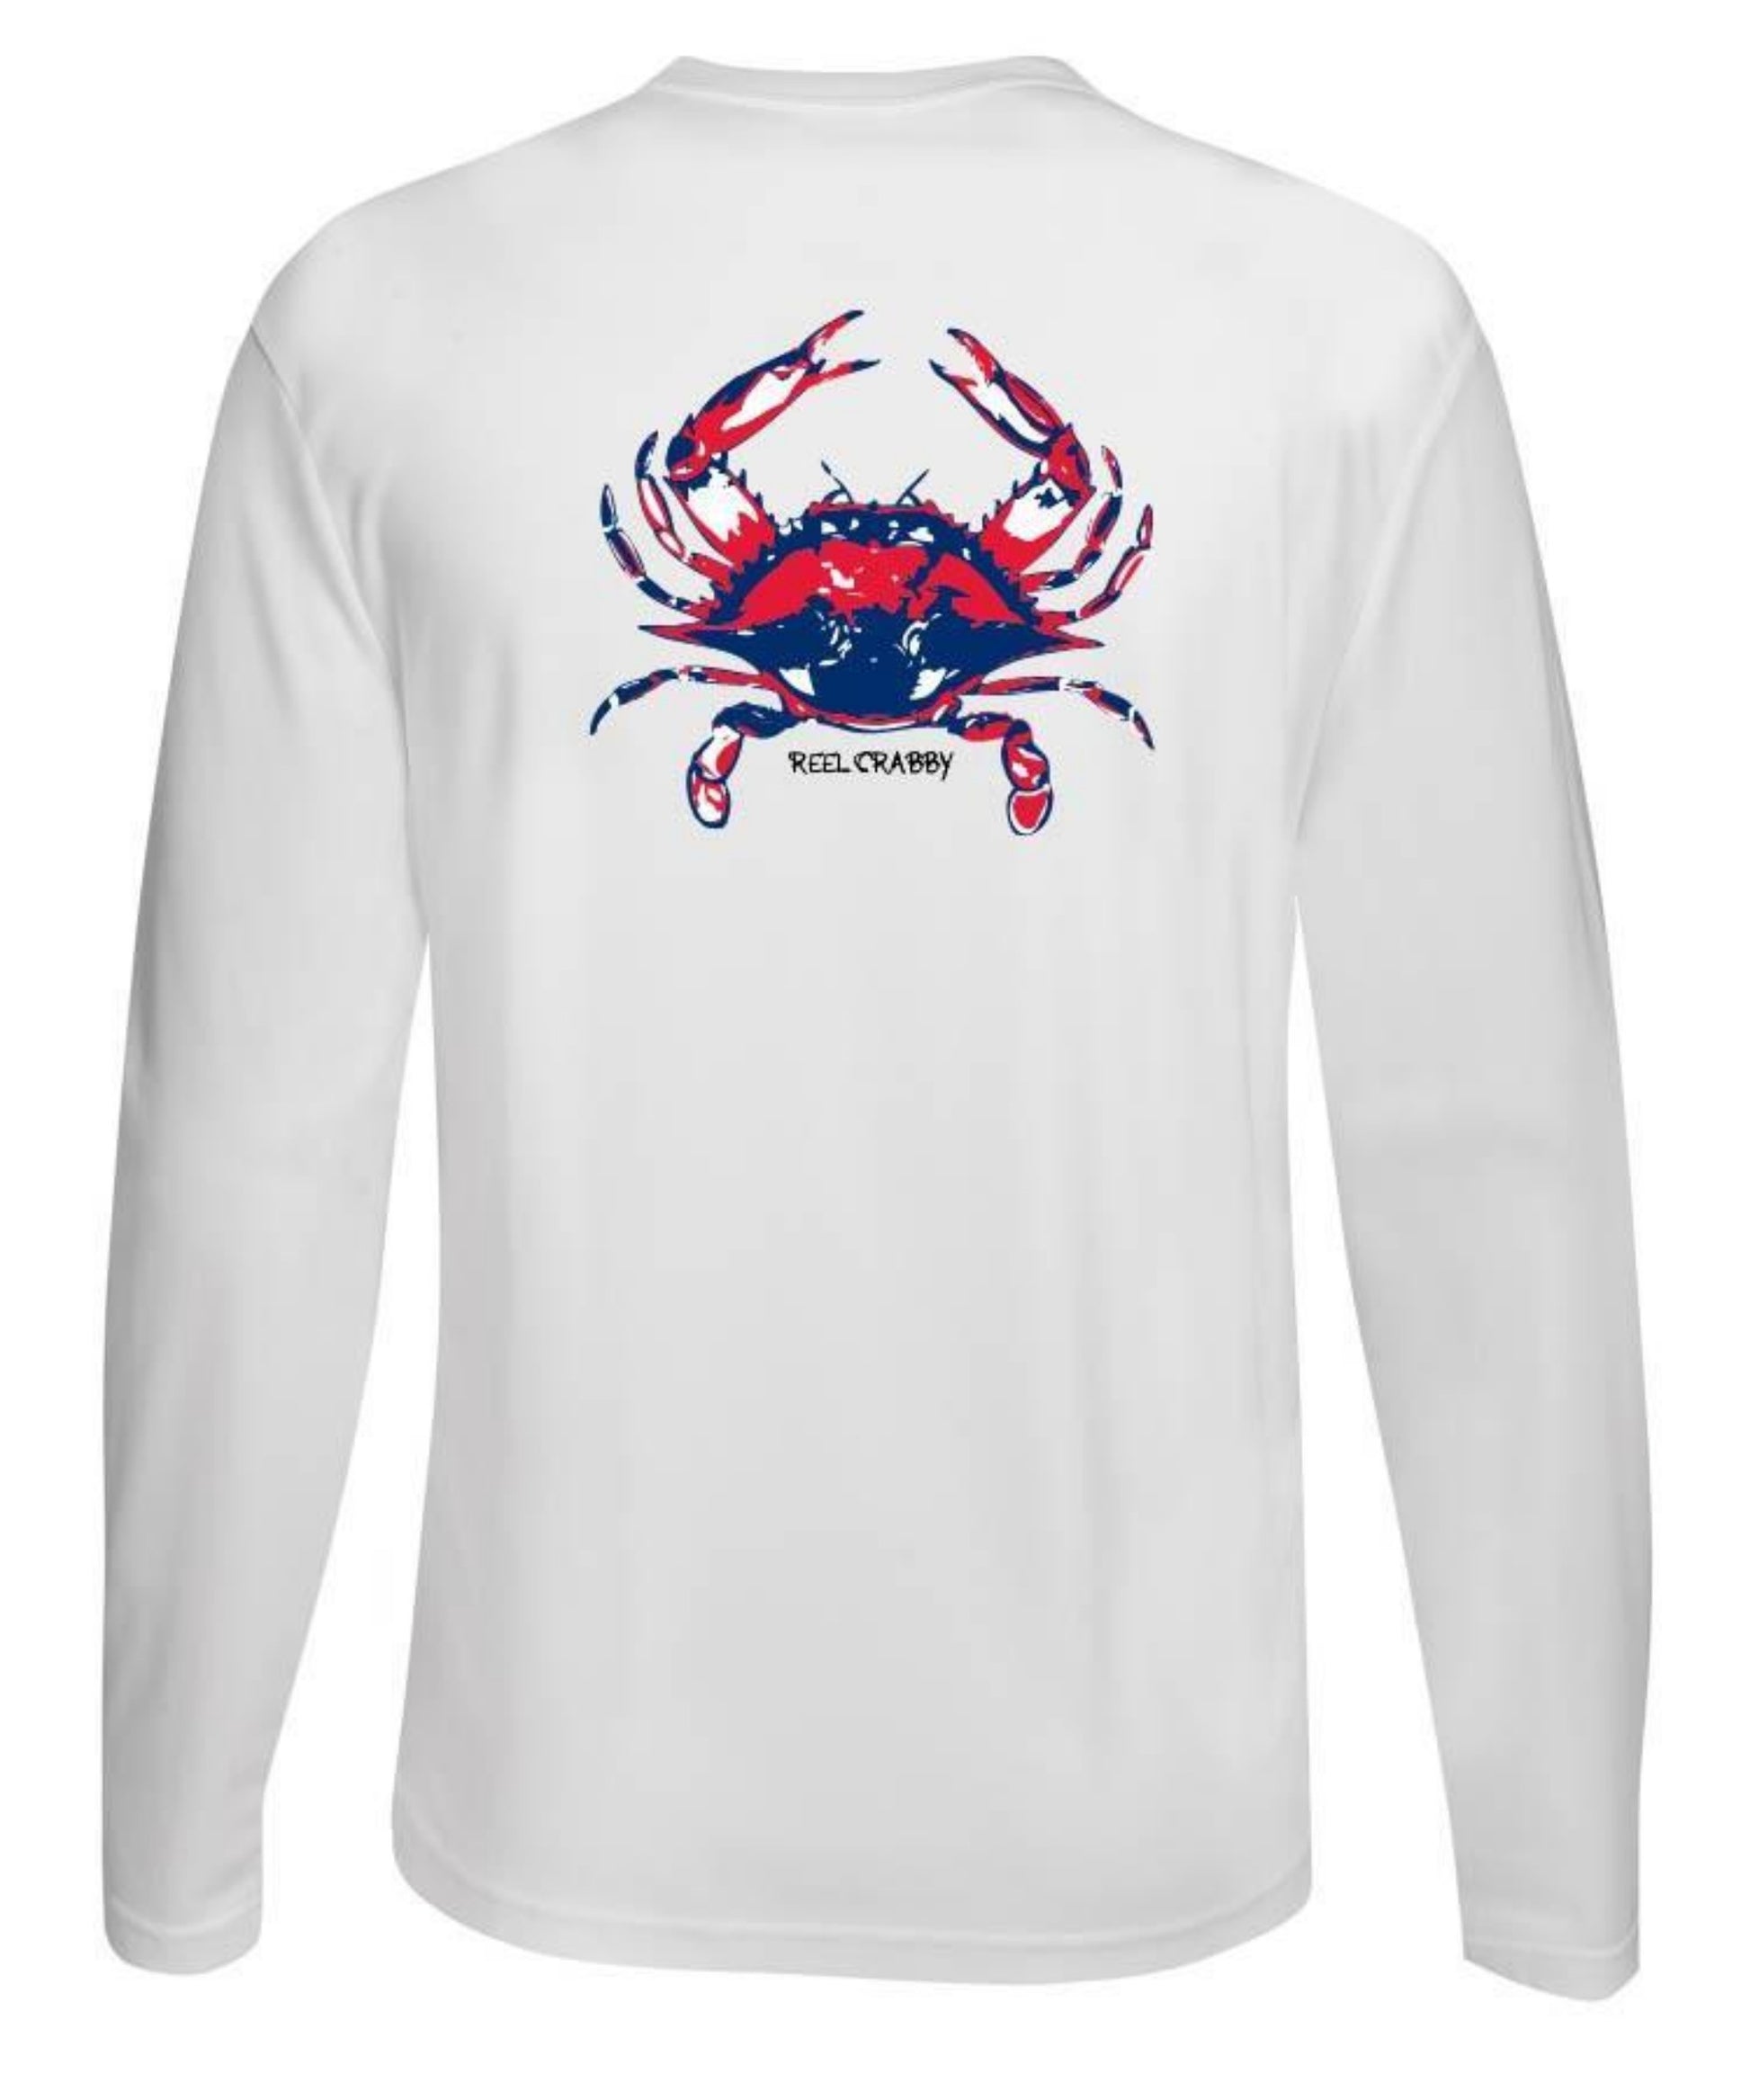 American Blue Crab -Reel Crabby Performance Dry-fit Long Sleeve White